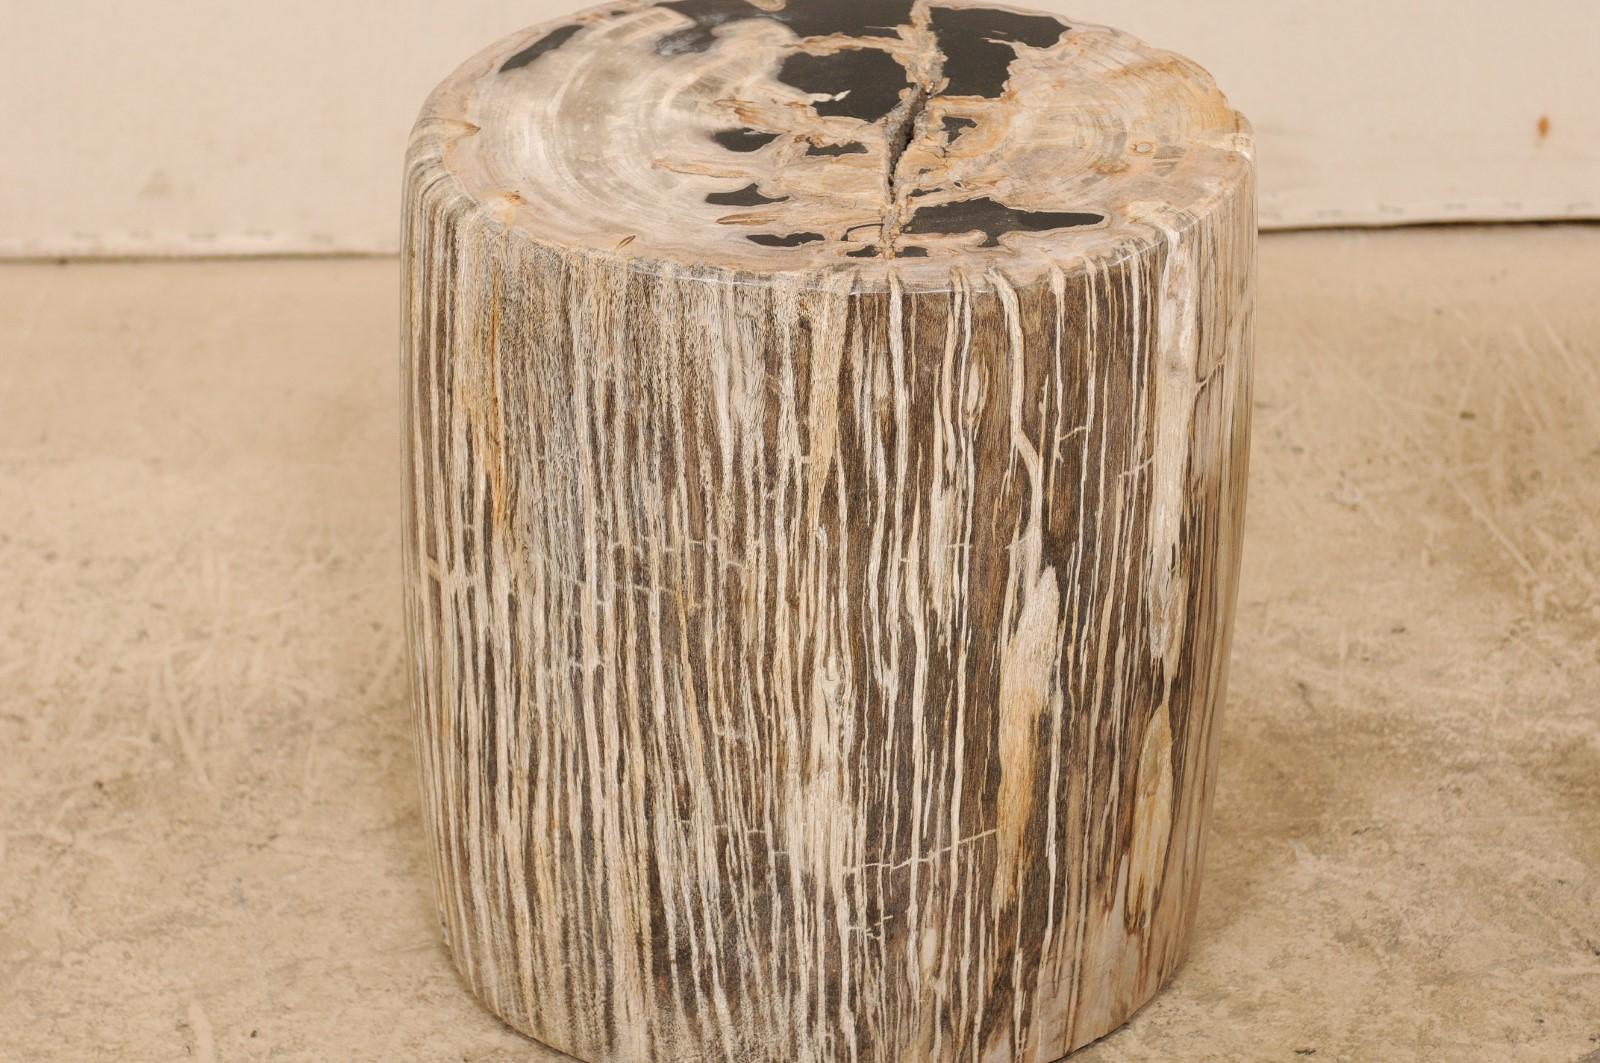 Pair of Petrified Wood Side Tables or Stools in Beautiful Cream and Black Colors 2